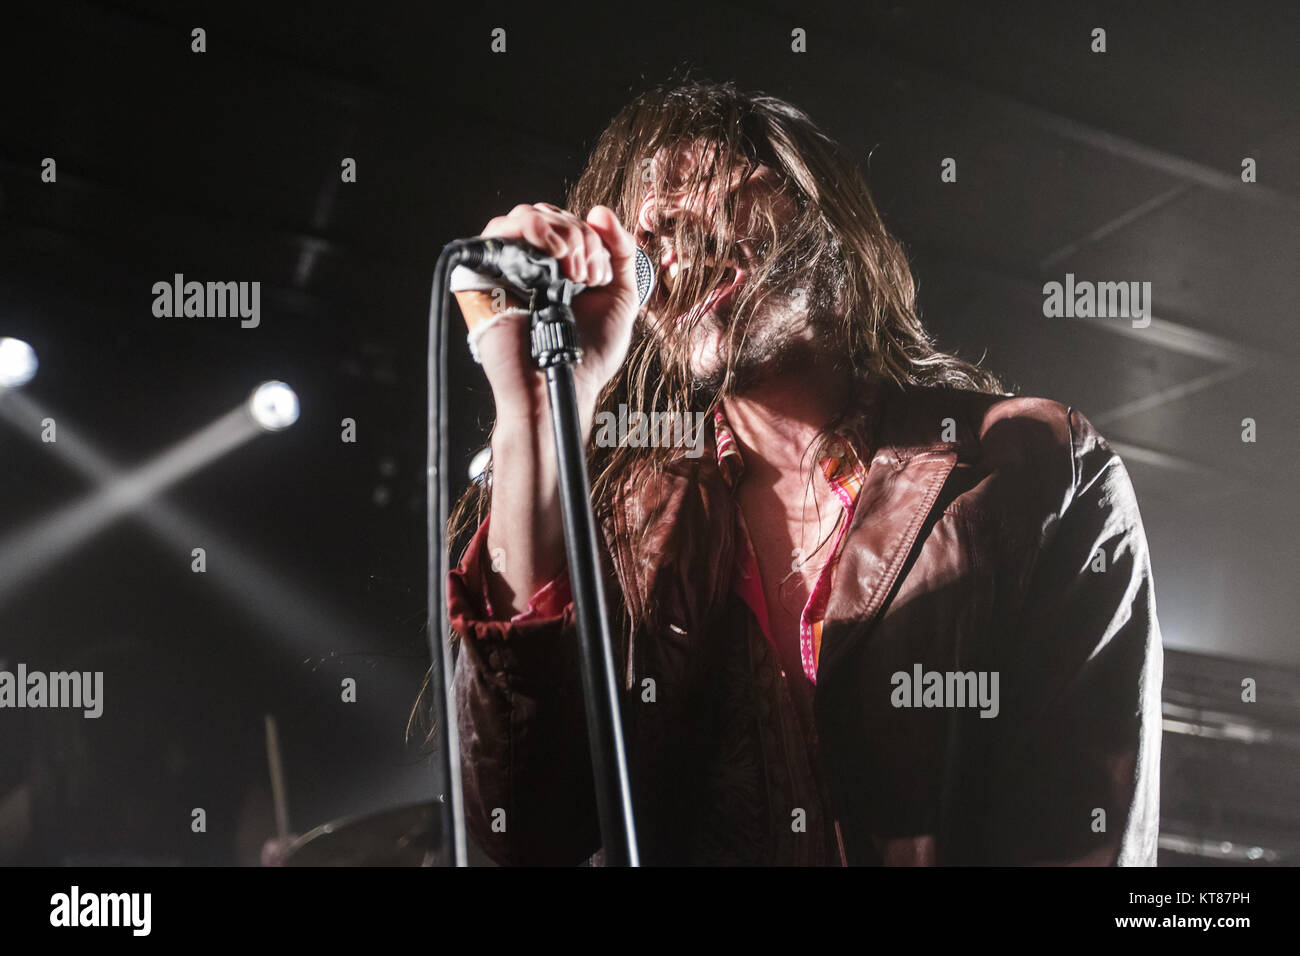 The American hard rock band Crobot performs a live concert at Stengade in Copenhagen. Here vocalist Brandon Yeagley is seen live on stage. Denmark, 02/03 2015. Stock Photo